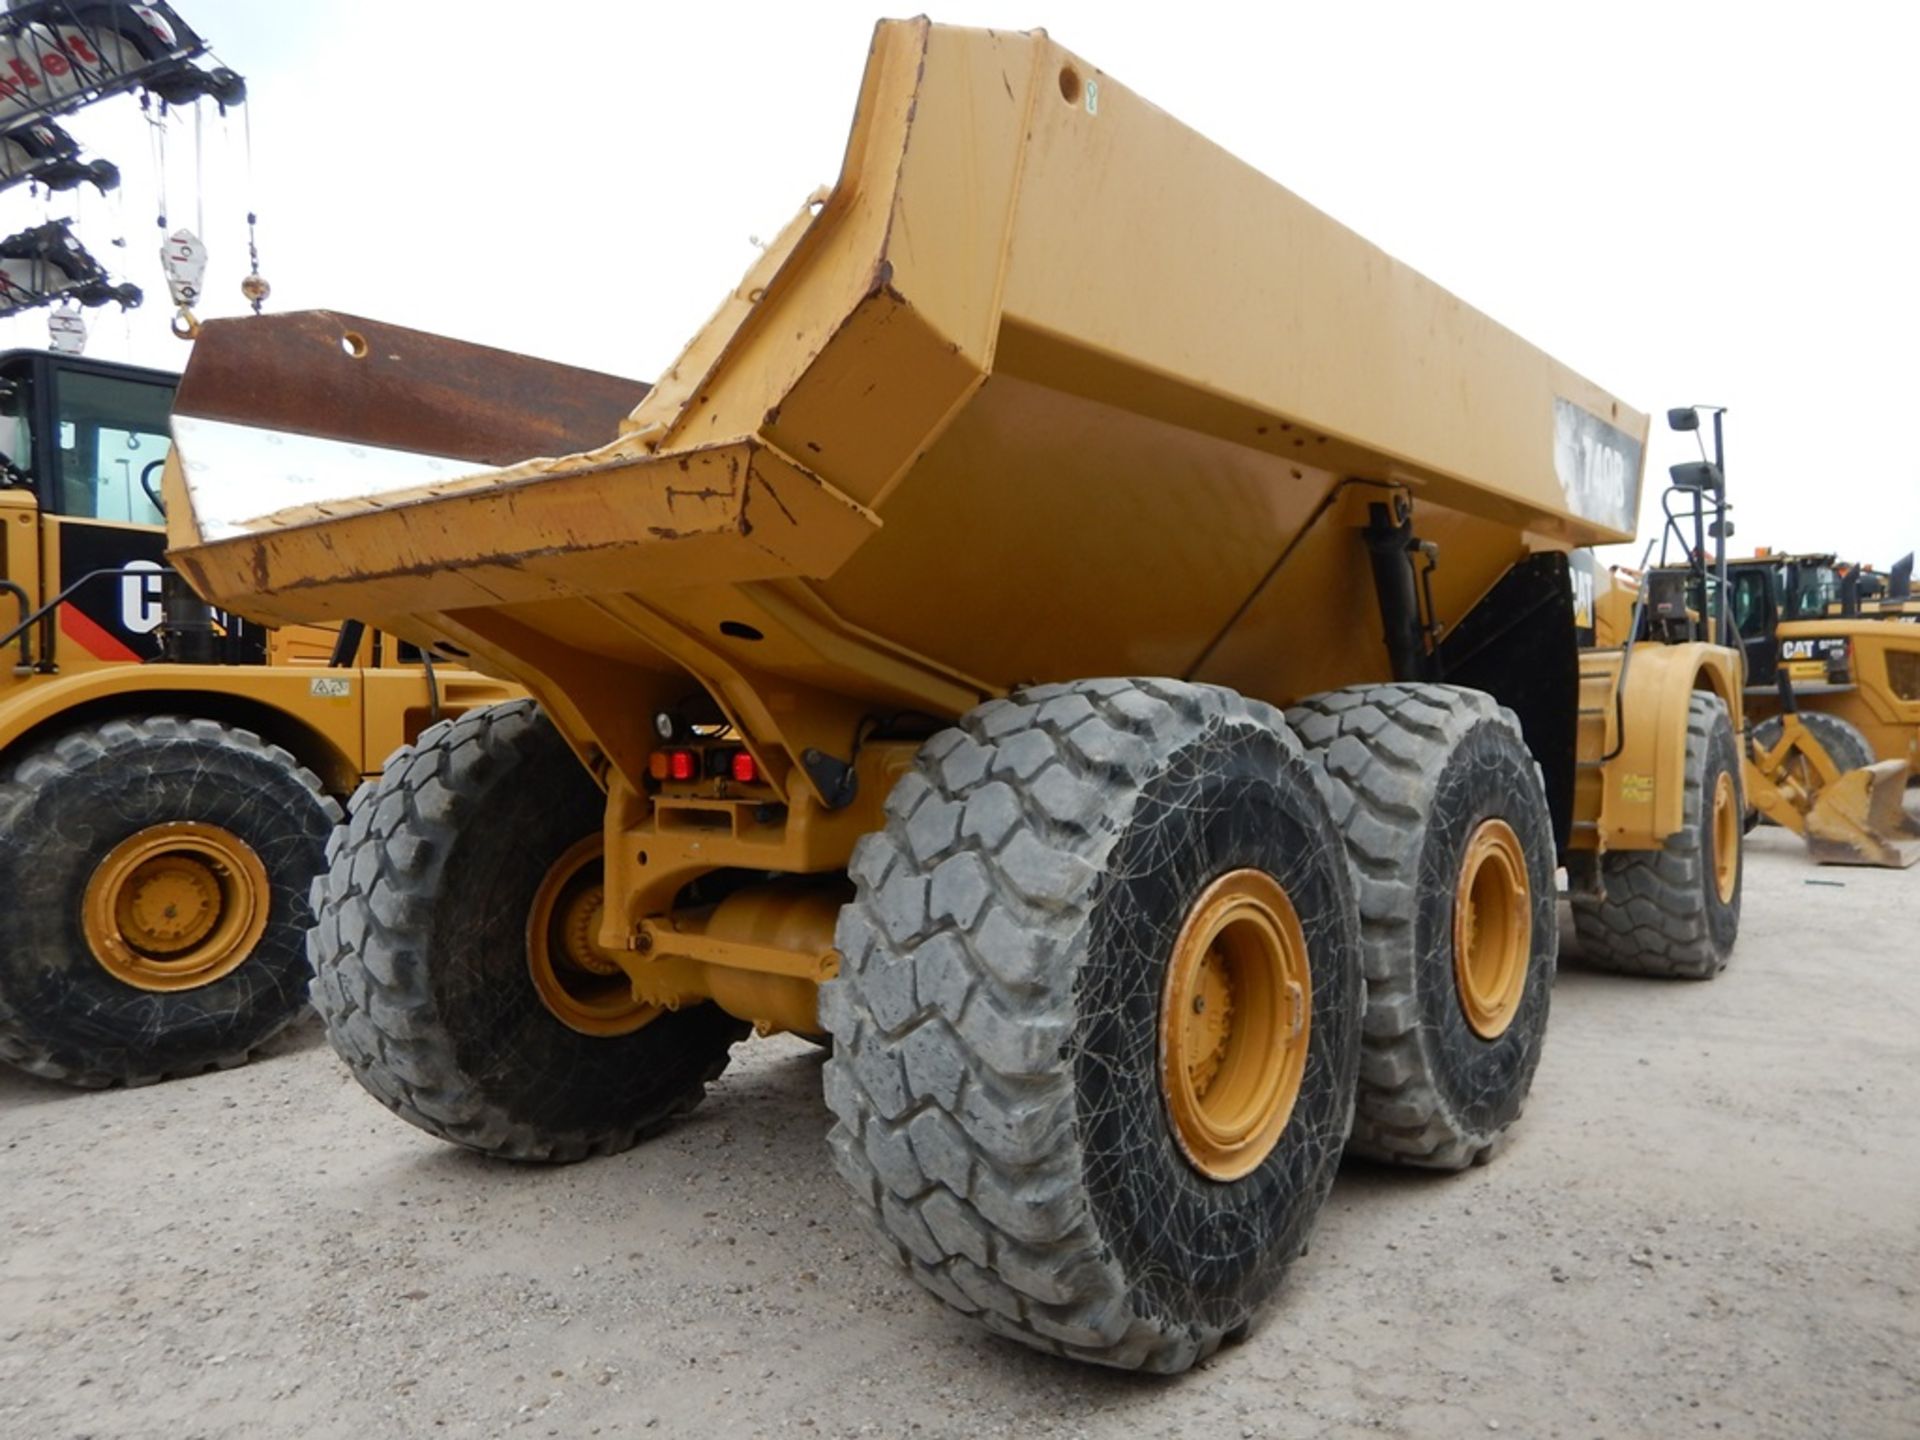 2013 Caterpillar Model 740B Off Highway Truck 3,594 Hours | CAB, A/C, CAT C15 DIESEL ENGINE, WITH - Image 3 of 12